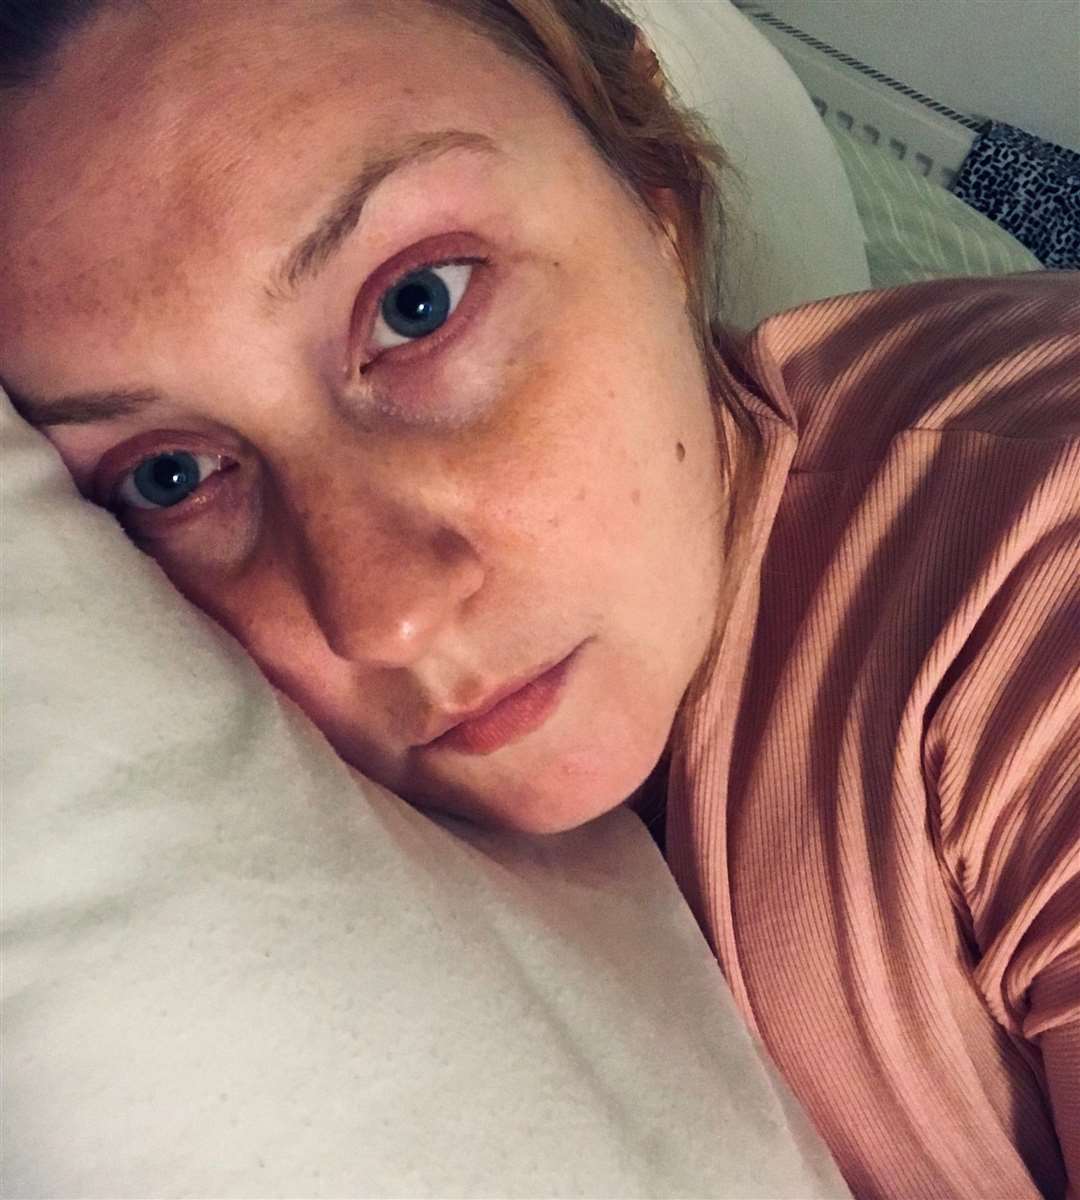 MS sufferer Amy Hinds, from Dartford, struggling with fatigue during a flare-up in 2020. Photo: Amy Hinds/ The MS Society